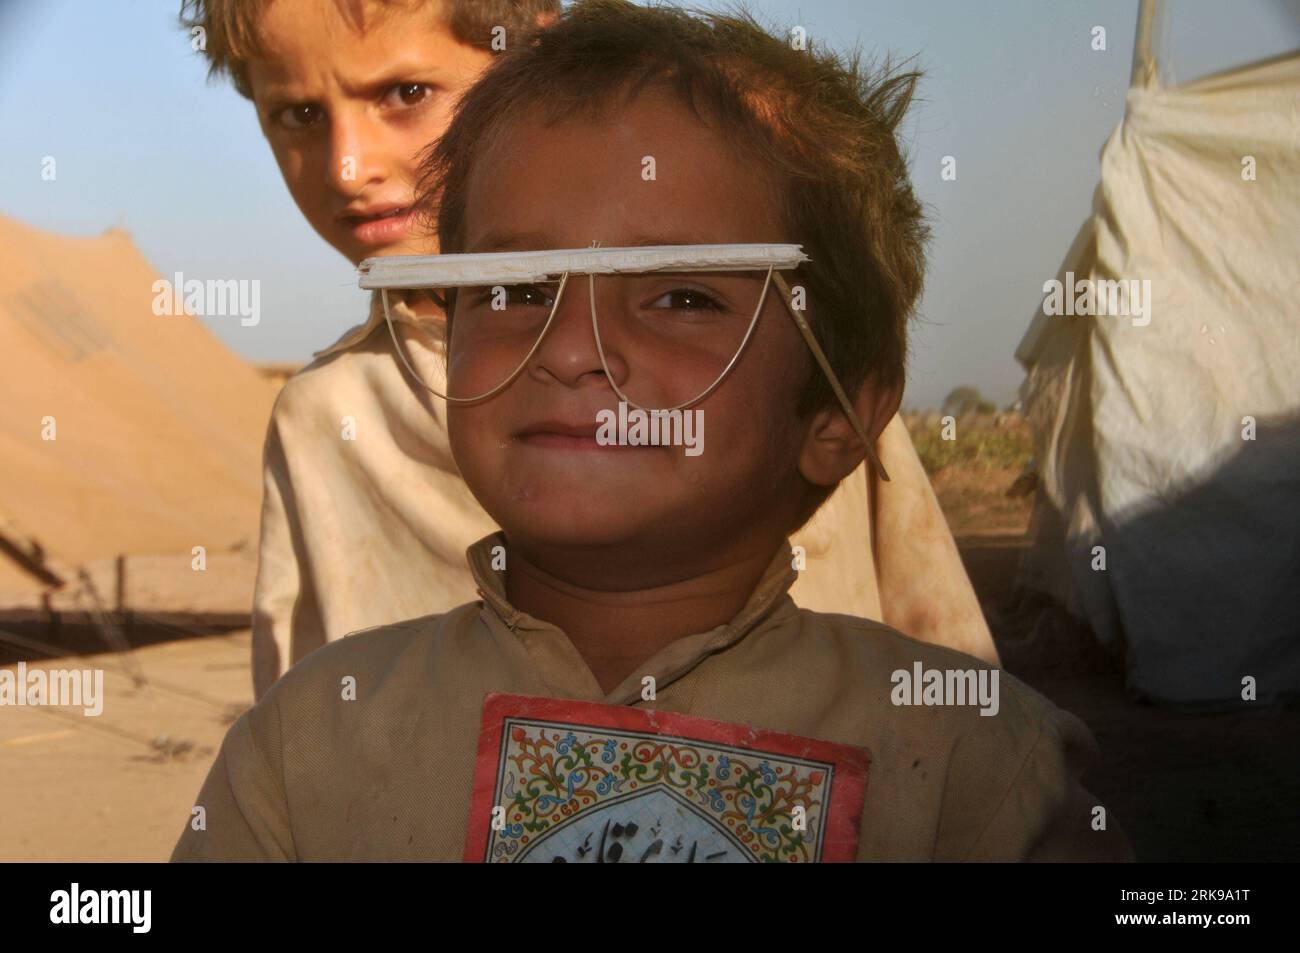 Bildnummer: 54155910  Datum: 19.06.2010  Copyright: imago/Xinhua (100620) -- ISLAMABAD, June 20, 2010 (Xinhua) -- An Afghan boy wears a pair of glasses made by himself at a refugee camp on the suburbs of Islamabad, capital of Pakistan, June 19, 2010. The United Nations marks the World Refugee Day on Sunday with the theme of Home by reminding the world of the 15 million refugees who are unable to return to their homes. (Xinhua/Yan Zhonghua) (wjd) (5)PAKISTAN-AFGHANISTAN-REFUGEE PUBLICATIONxNOTxINxCHN Gesellschaft kbdig xkg 2010 quer premiumd xint o0 Kind Junge Flüchtling Brille selbstgemacht Stock Photo